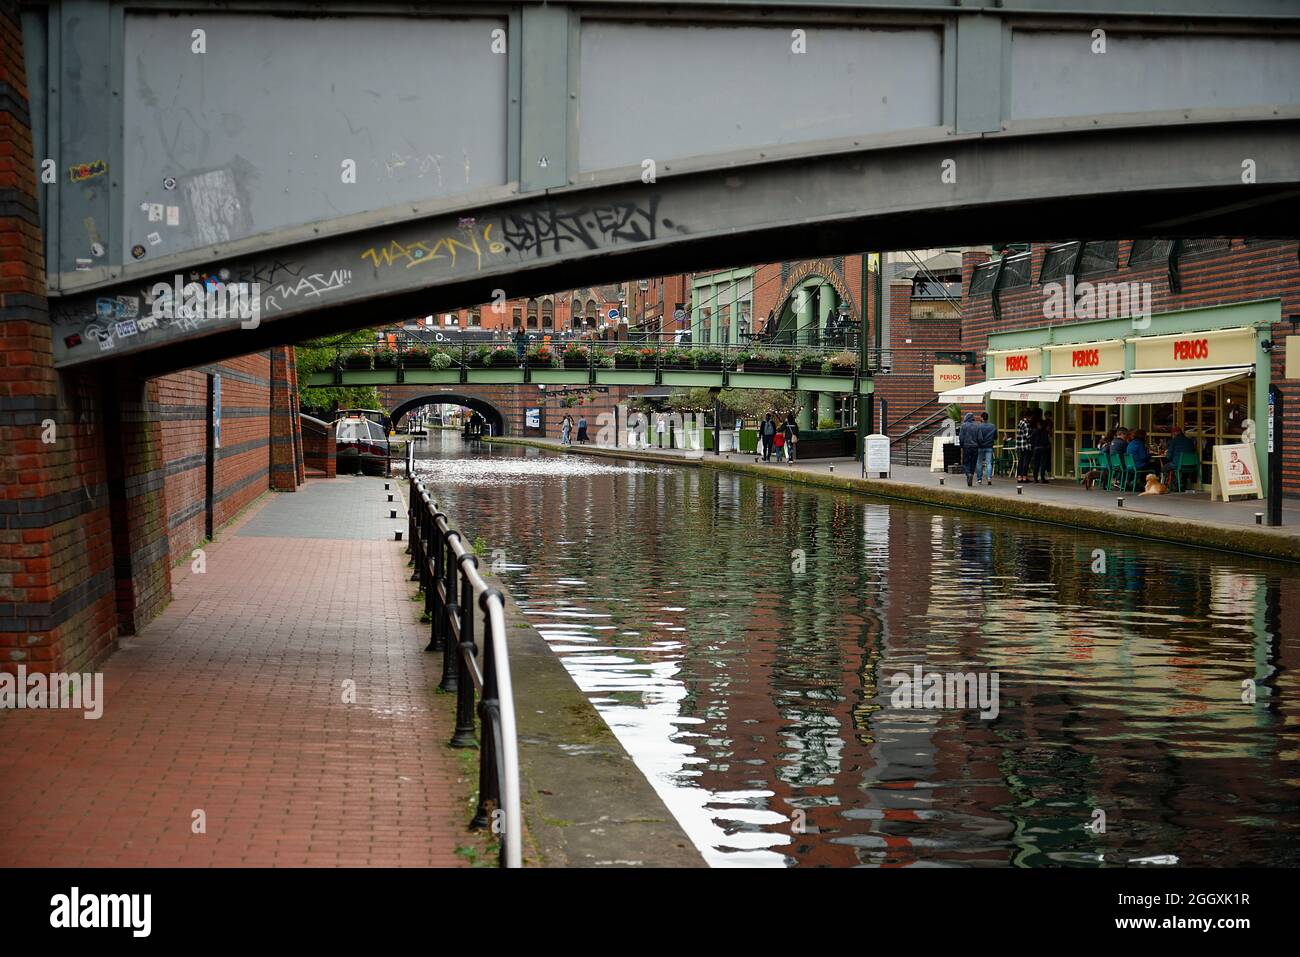 Canal, restaurants, walkway in the city of Birmingham, England. The canal quarter. Stock Photo